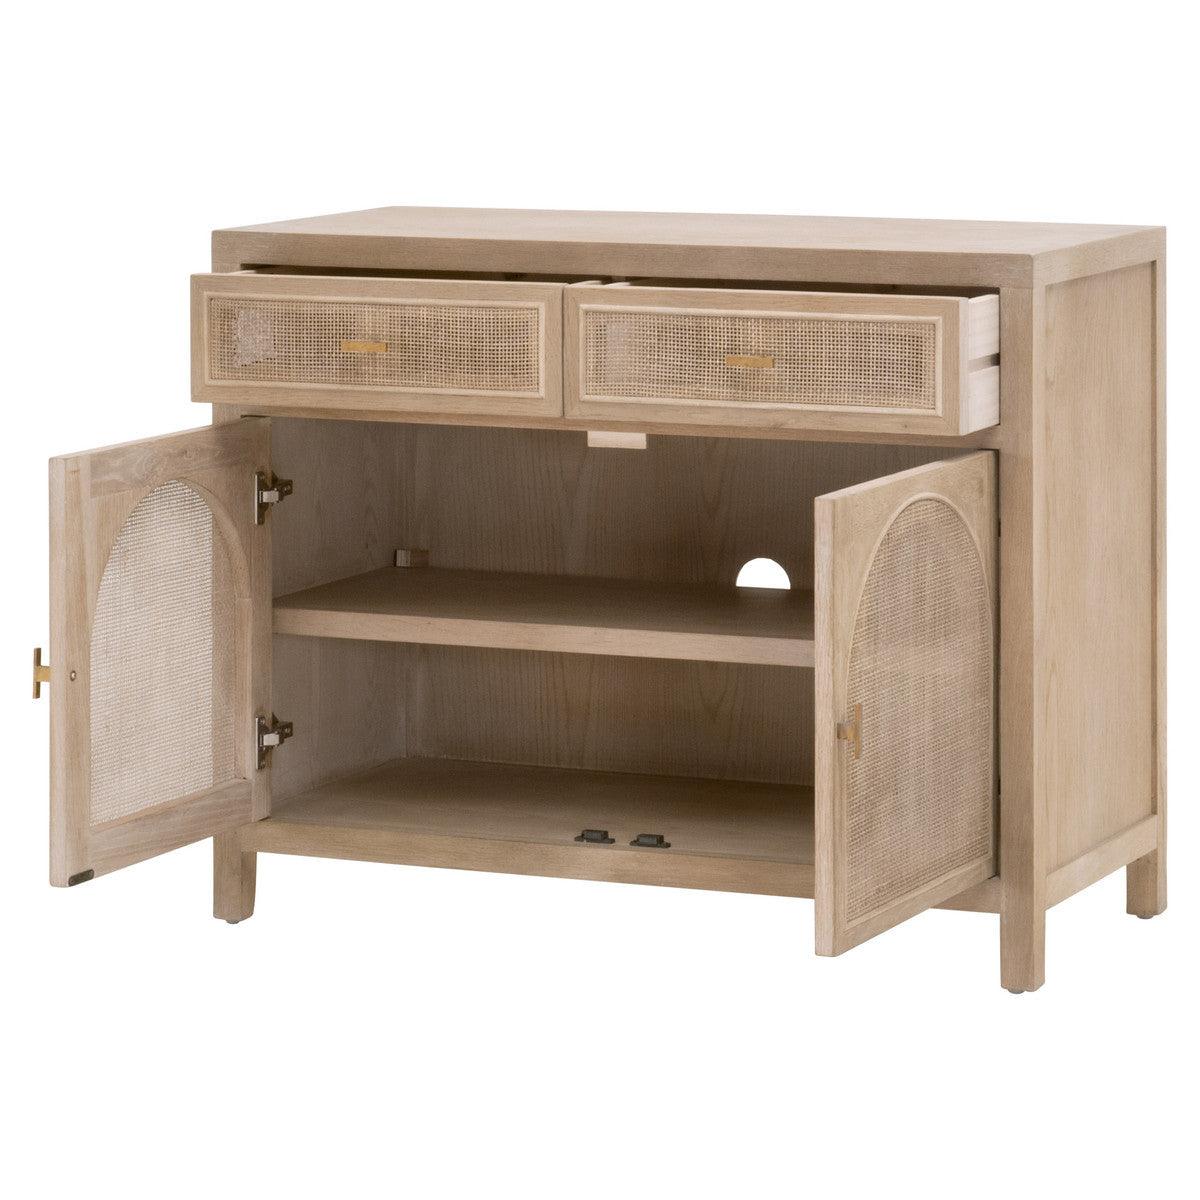 Cane Media Console Small TV Stand Sustainable Furniture Accent Cabinets Sideboards and Things By Essentials For Living